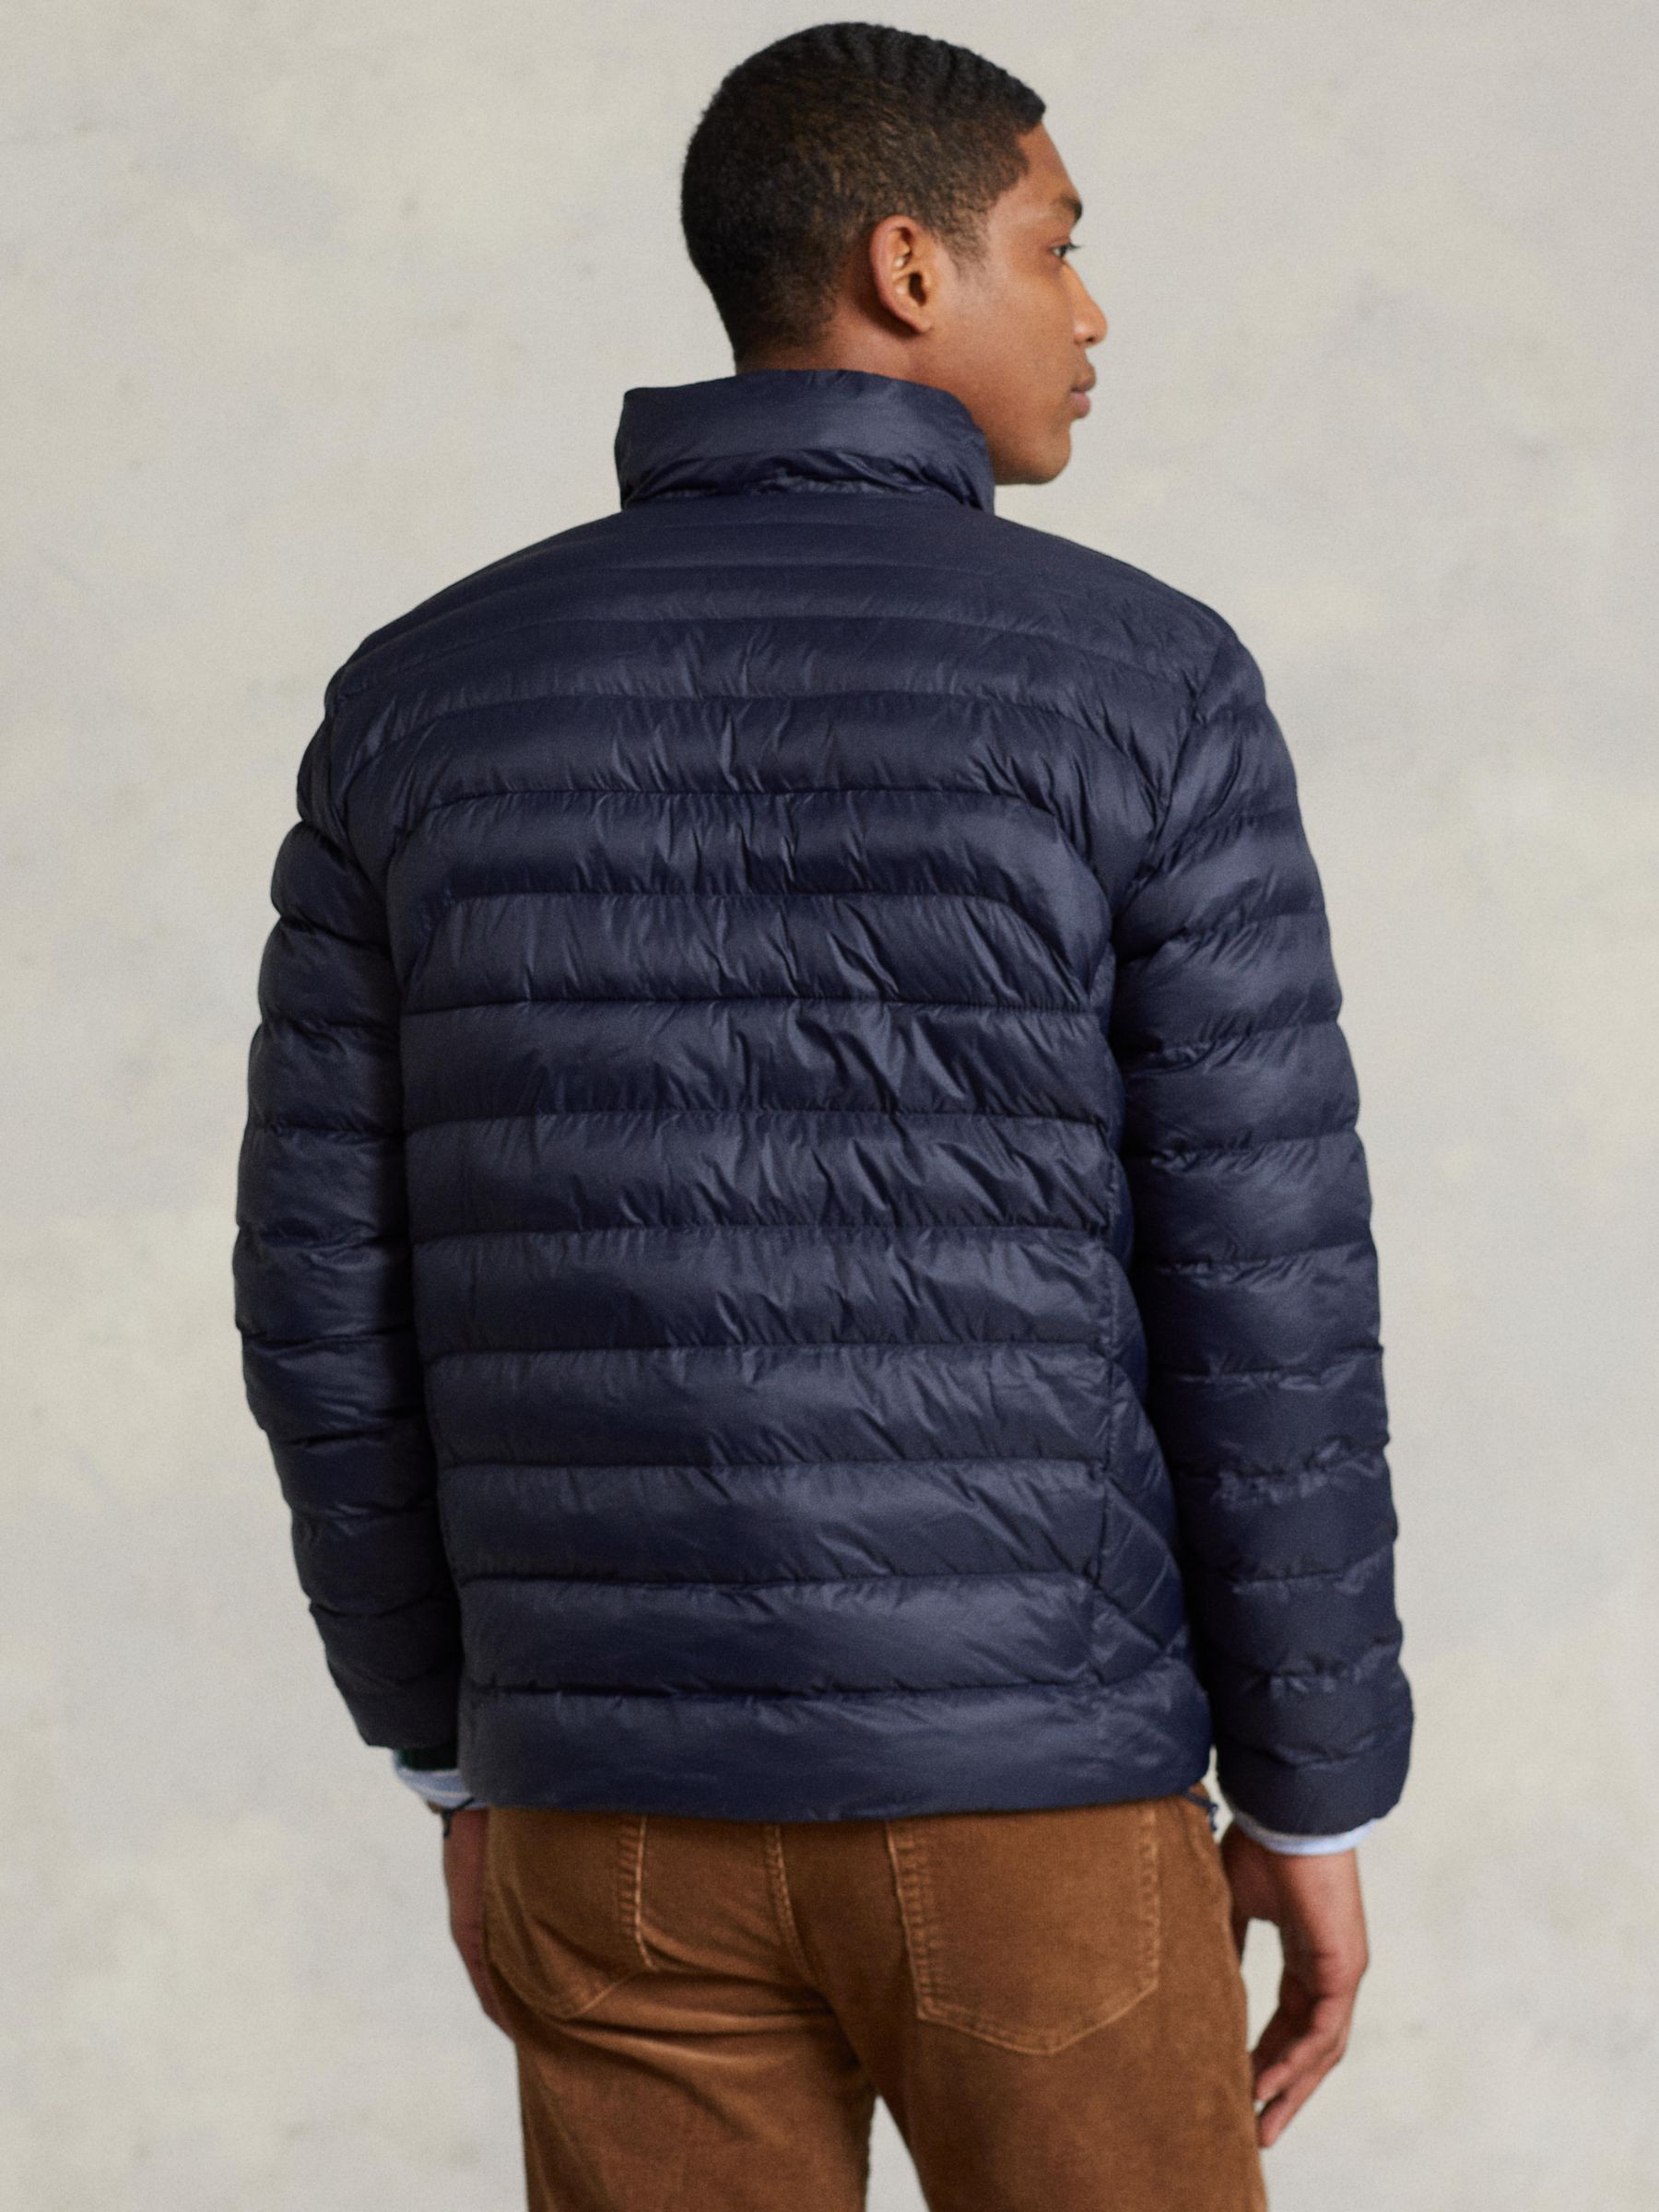 Quilty pleasures: 20 of the best men's puffer jackets – in pictures, Fashion